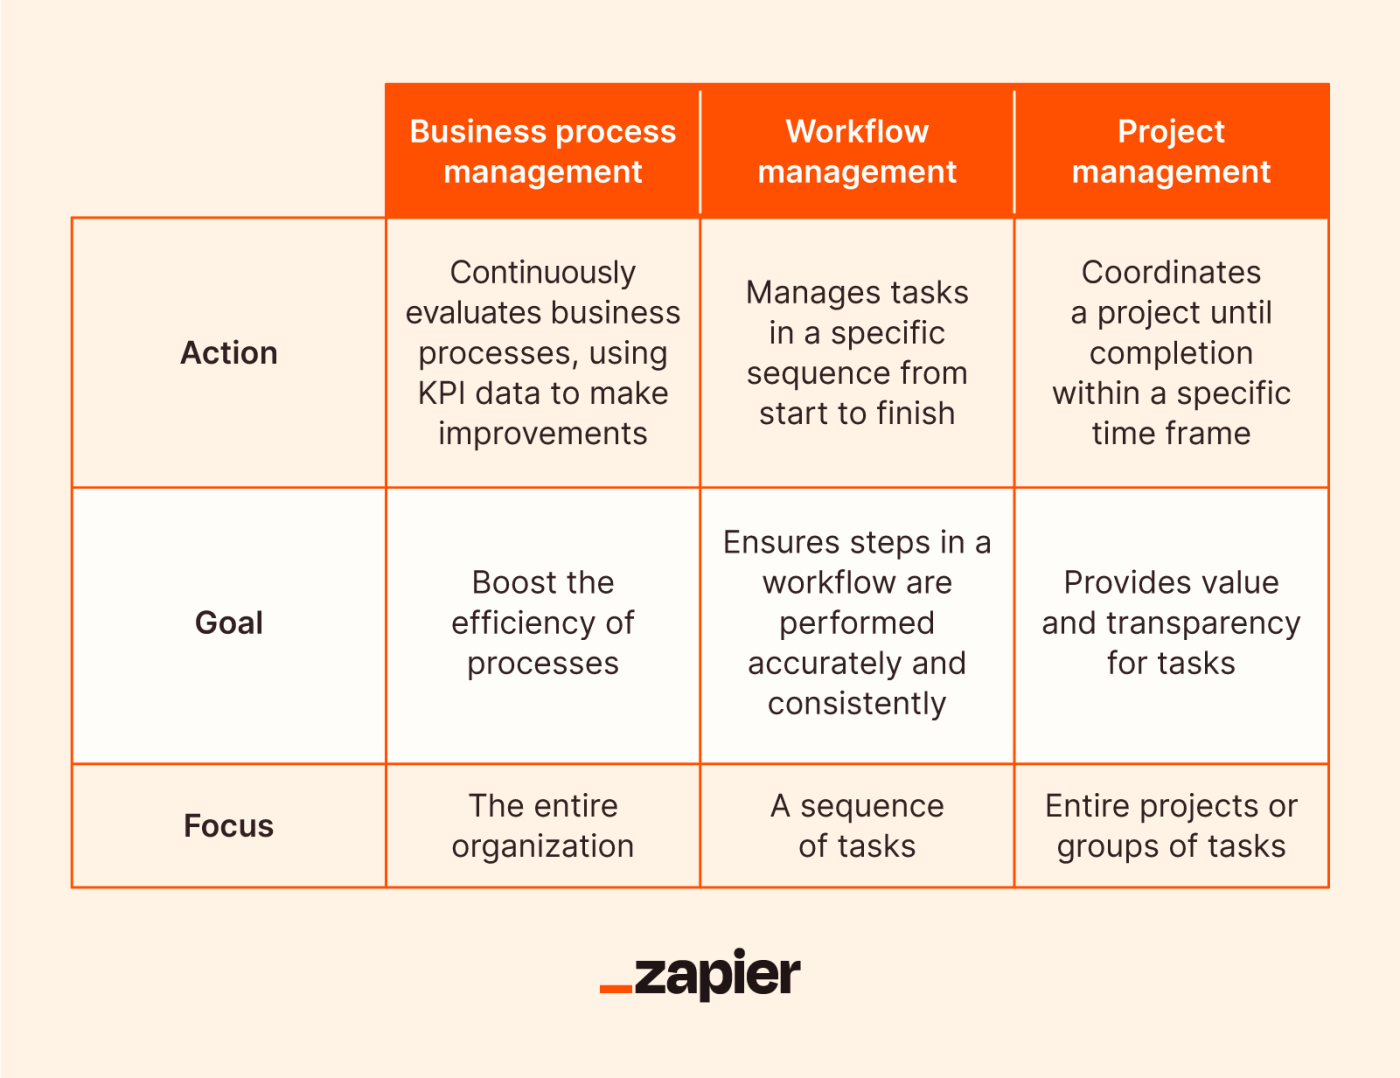 Chart showing the action, goal, and focus differences between BPM, workflow management and project management